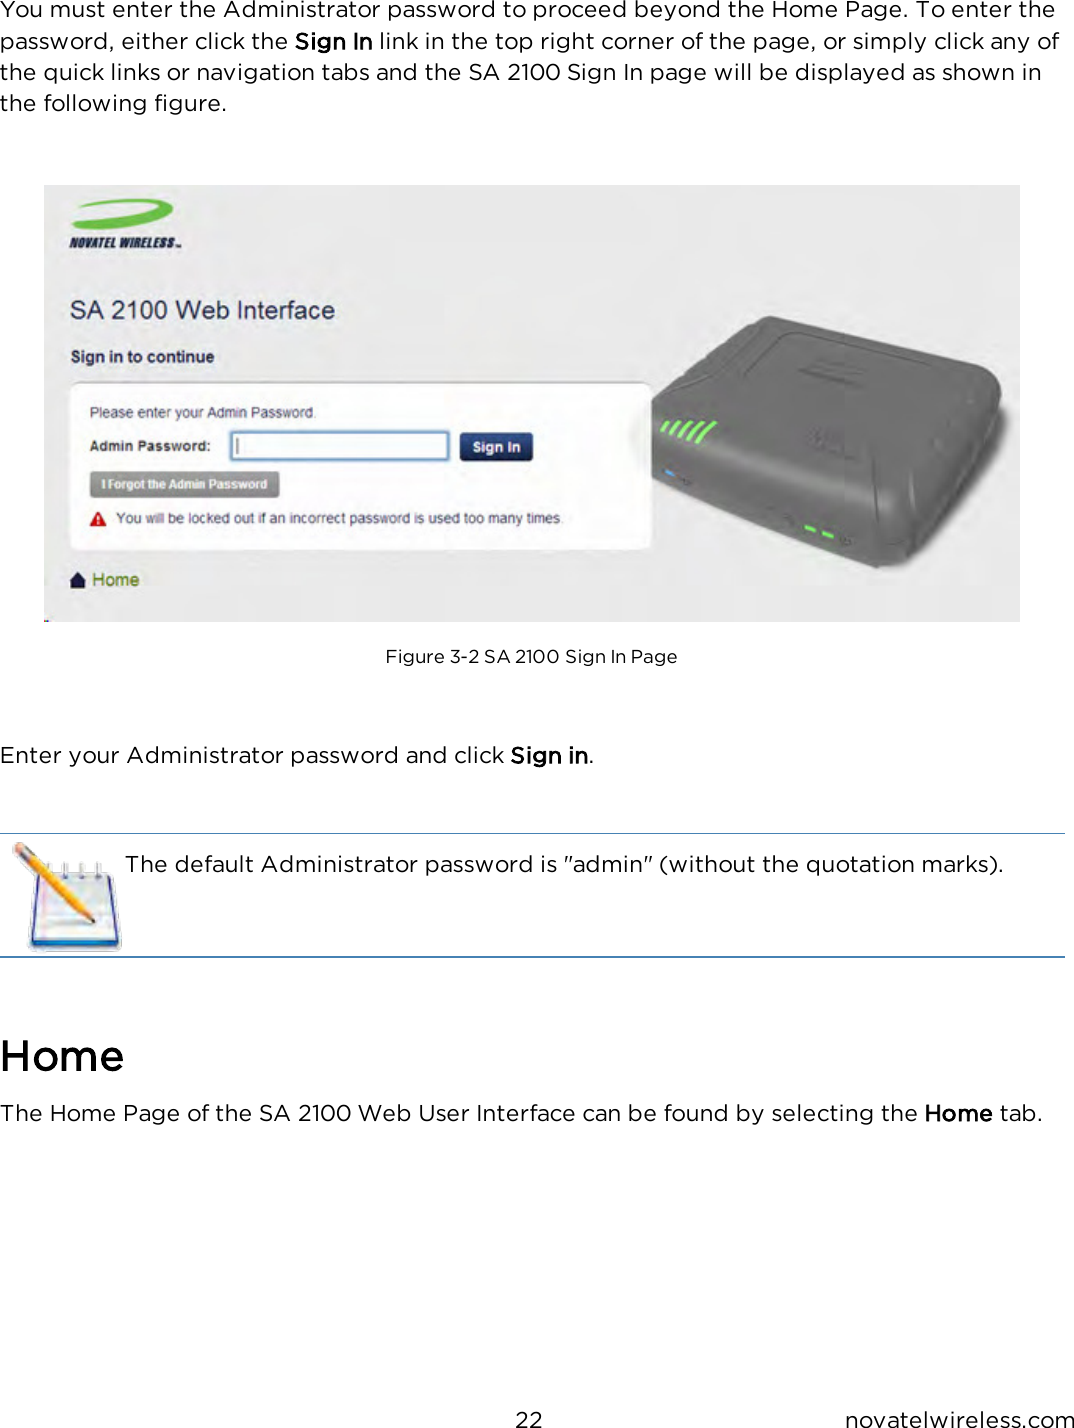 22 novatelwireless.comYou must enter the Administrator password to proceed beyond the Home Page. To enter thepassword, either click the Sign In link in the top right corner of the page, or simply click any ofthe quick links or navigation tabs and the SA 2100 Sign In page will be displayed as shown inthe following figure.Figure 3-2 SA 2100 Sign In PageEnter your Administrator password and click Sign in.The default Administrator password is &quot;admin&quot; (without the quotation marks).HomeThe Home Page of the SA 2100 Web User Interface can be found by selecting the Home tab.